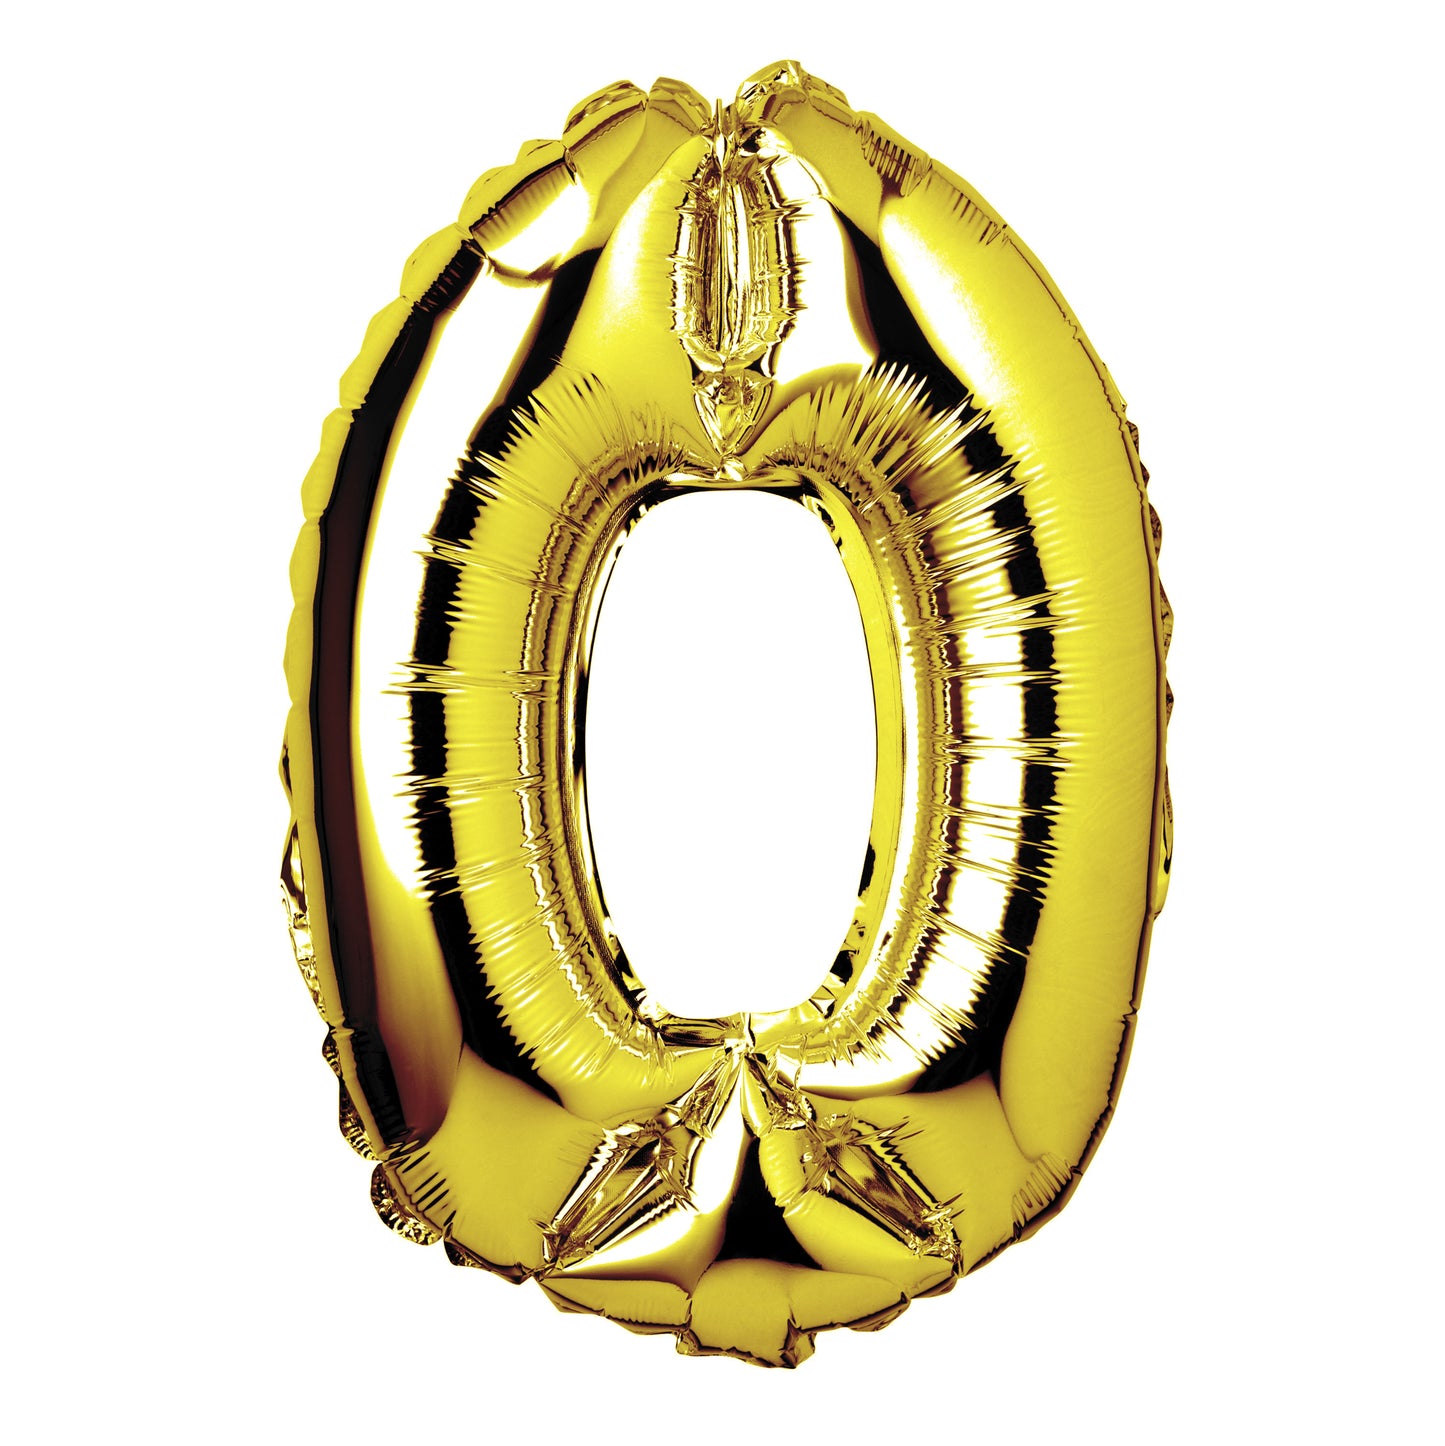 34" Giant Foil Gold Number 0 Balloon